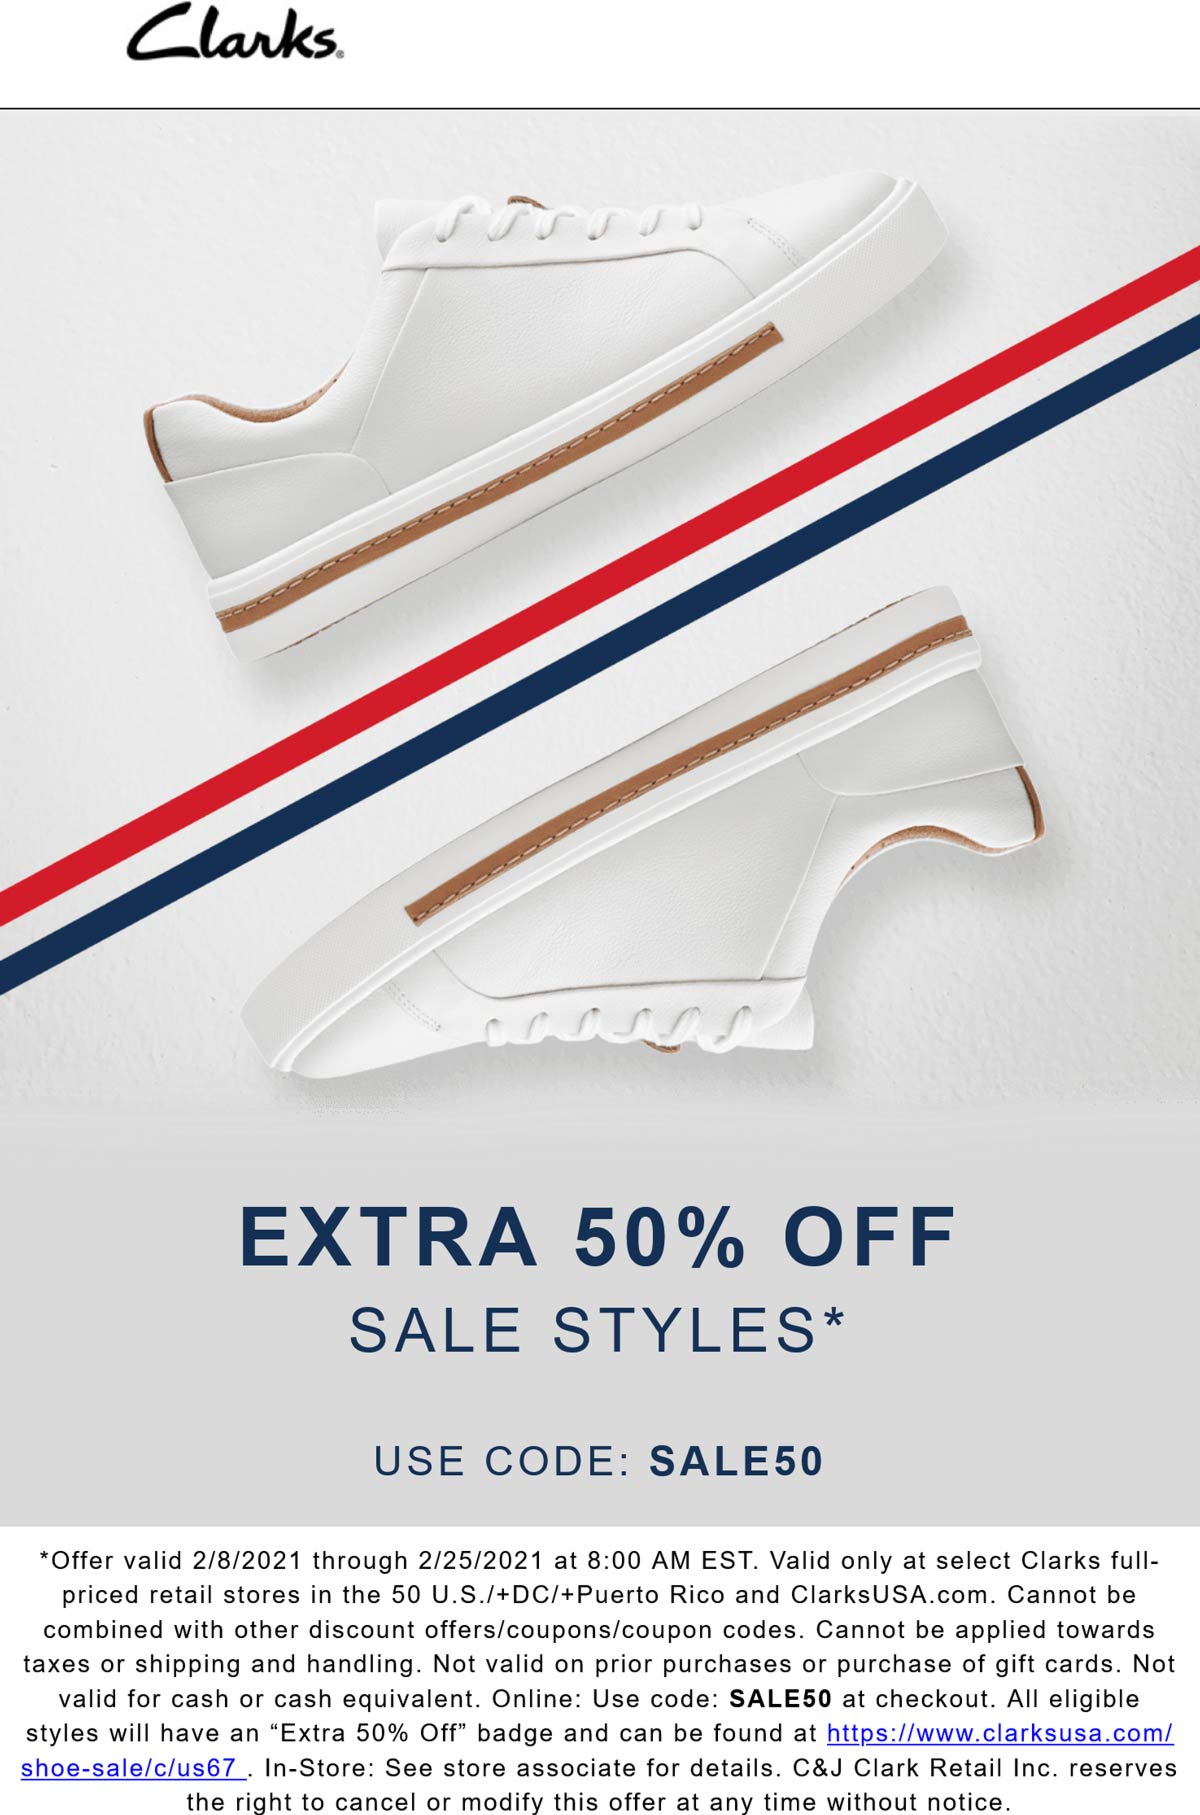 Clarks stores Coupon  Extra 50% off sale styles at Clarks via promo code SALE50 #clarks 